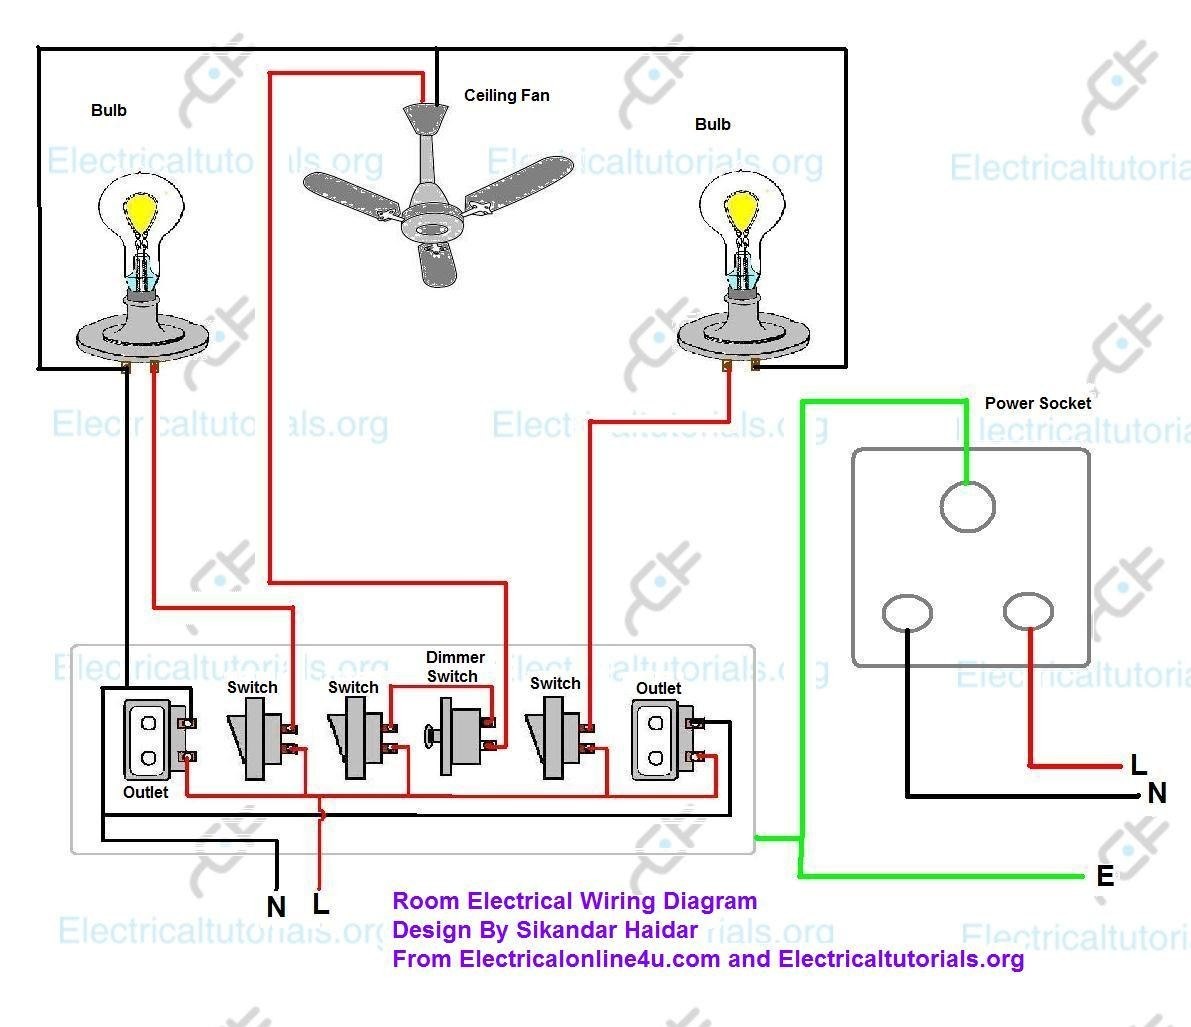 Electricity Diagram Marvellous Bedroom Wiring Diagram Wiring Diagram 34 Marvellous Electricity Diagram